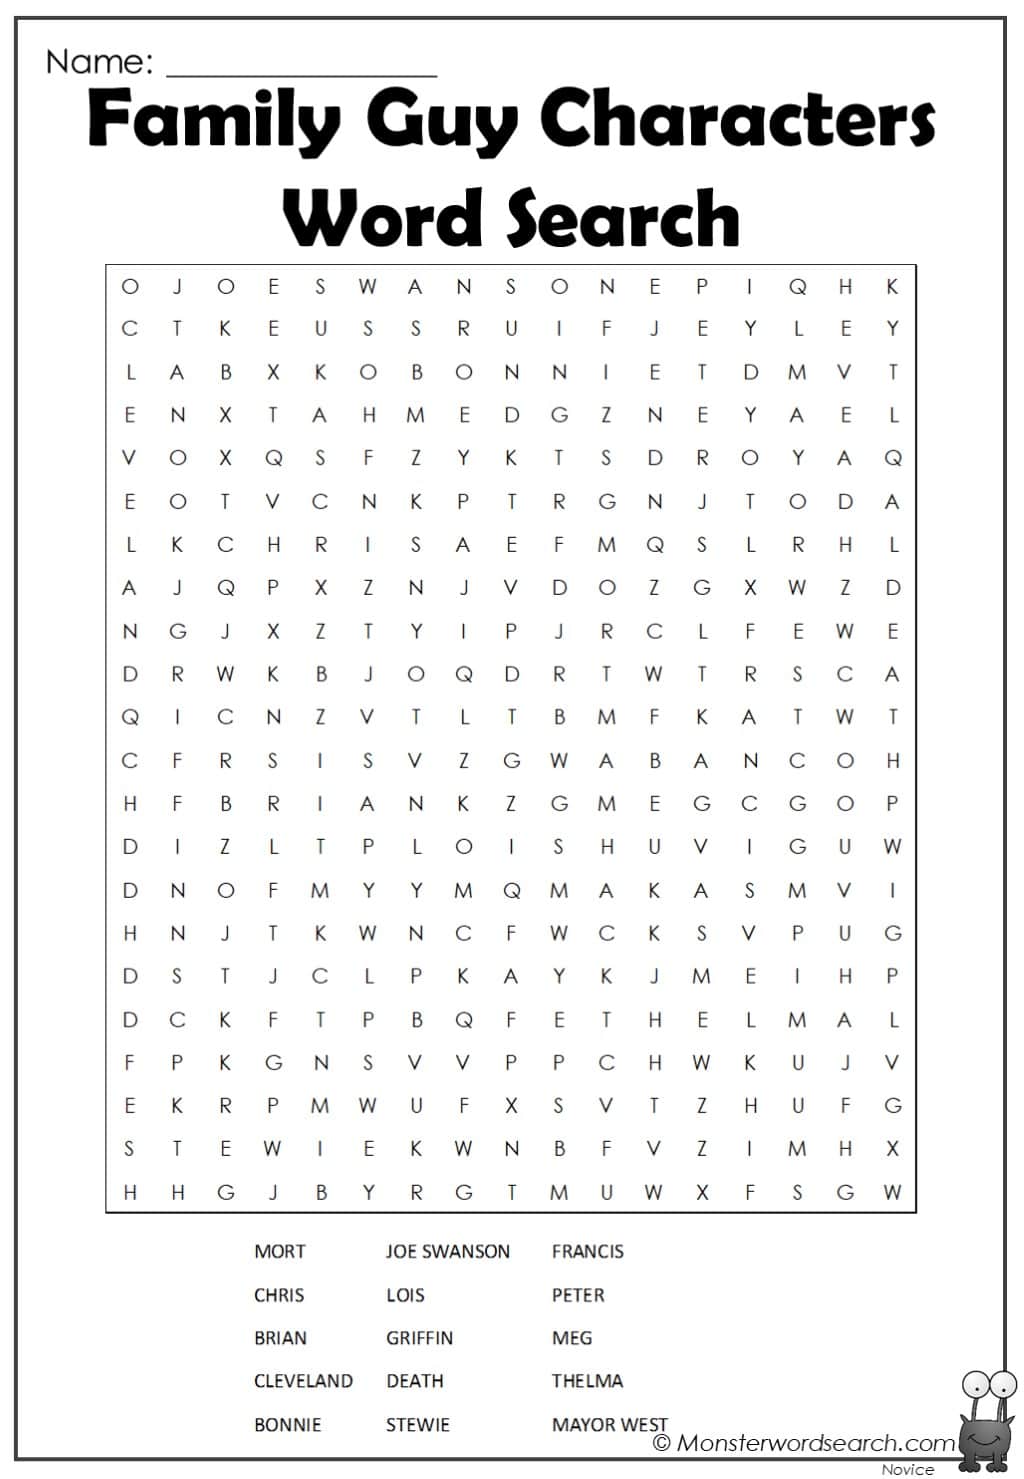 Family guy characters word search